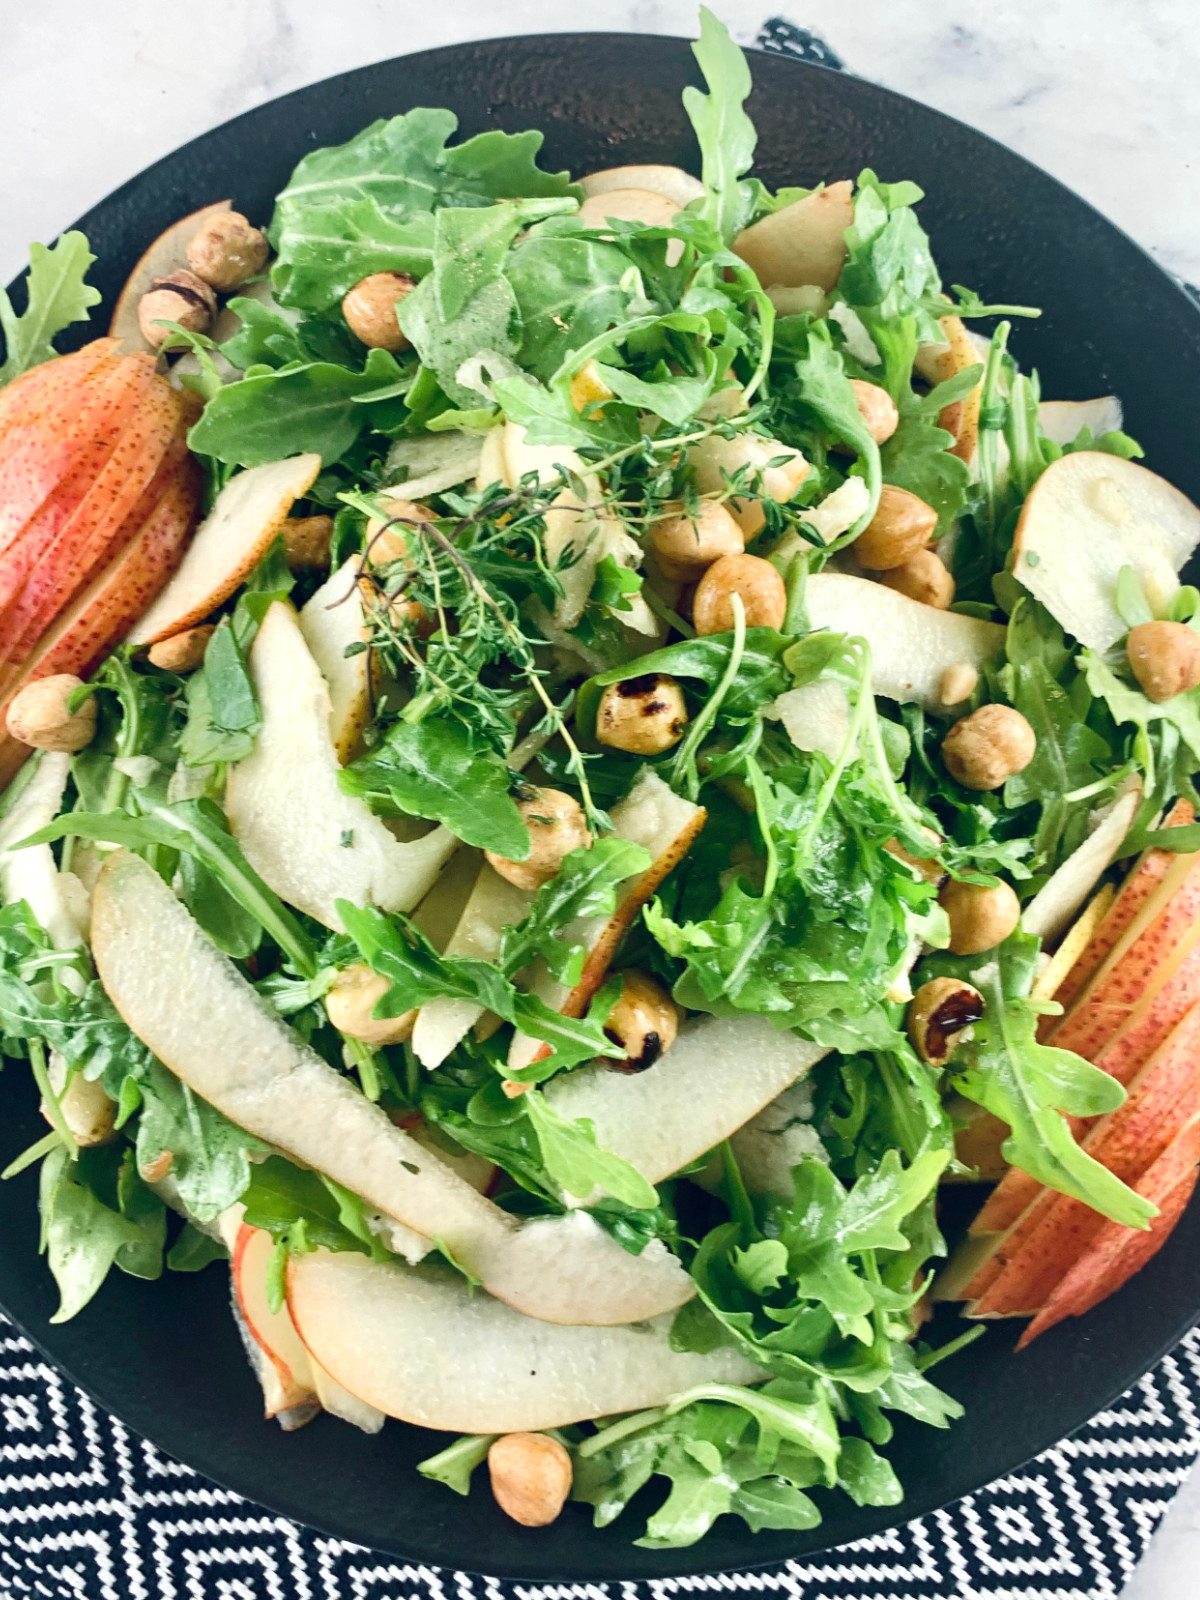 A close-up of a Pear and rocket salad on a black plate.